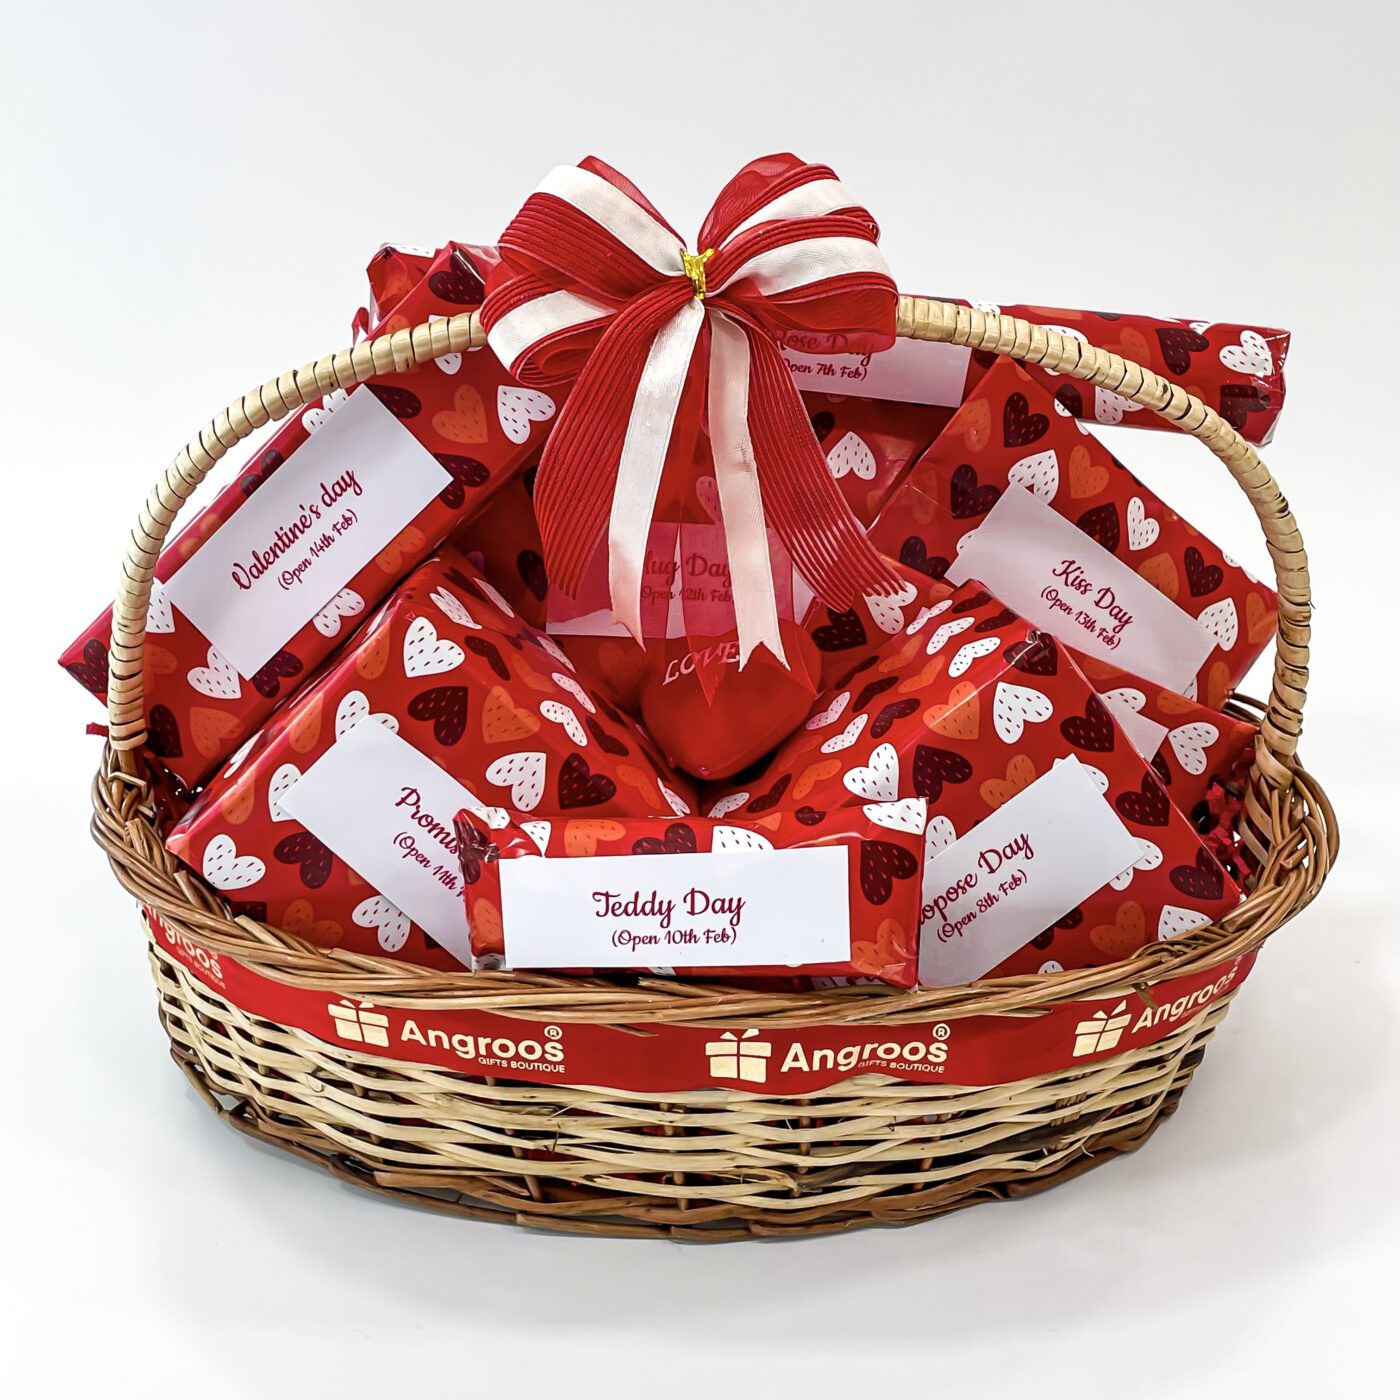 Christmas Gourmet Basket | Alma Gourmet Online Store - The Finest Italian  Food Products | Order Products Now From Our Italian Gourmet Food Store !